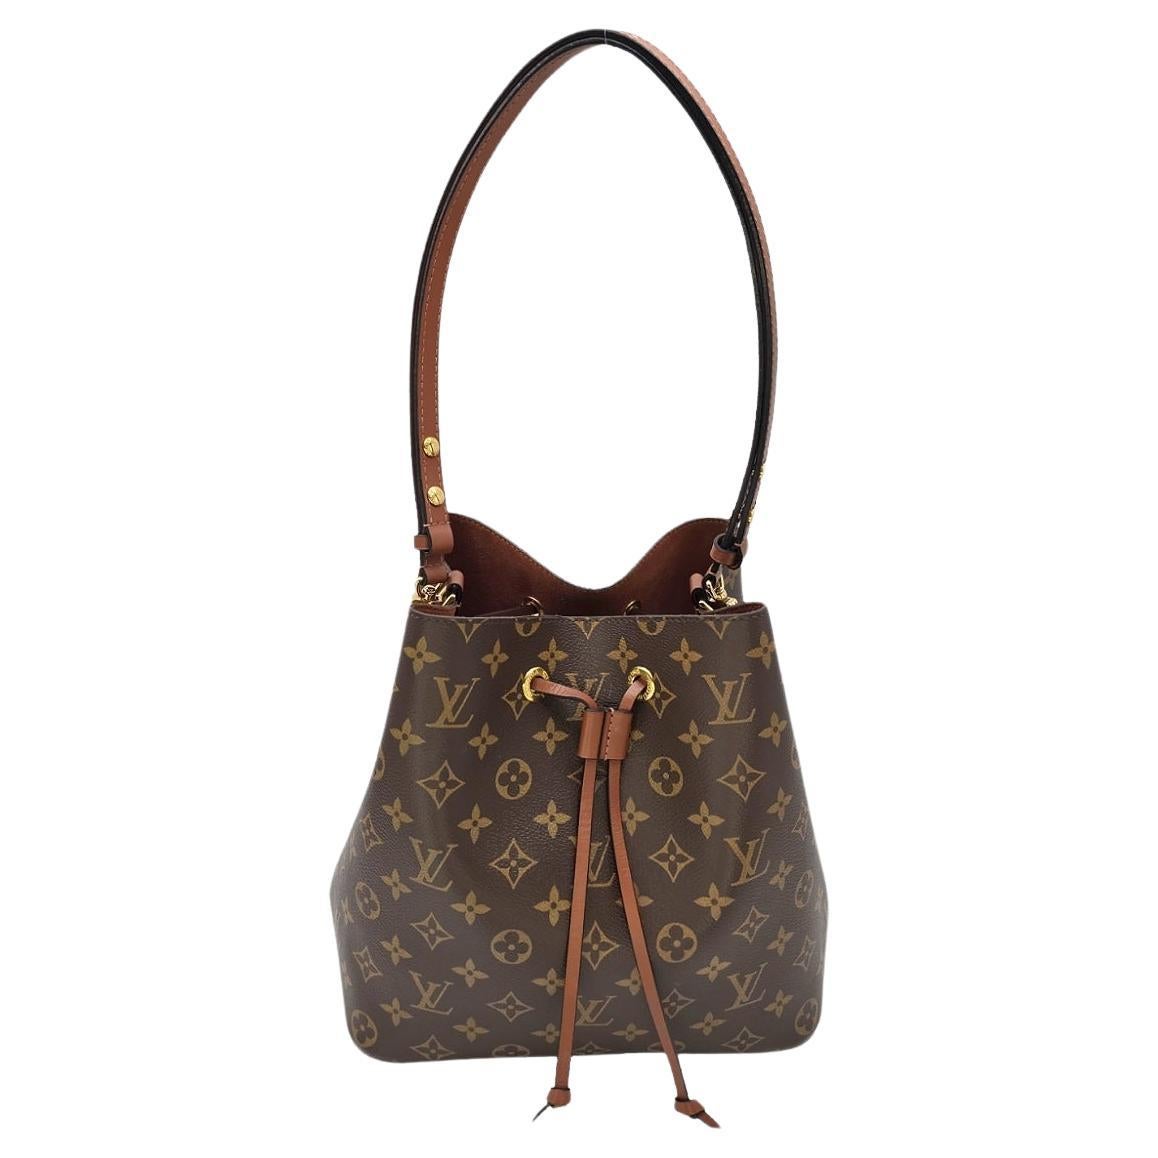 Where can I sell my Louis Vuitton bag?